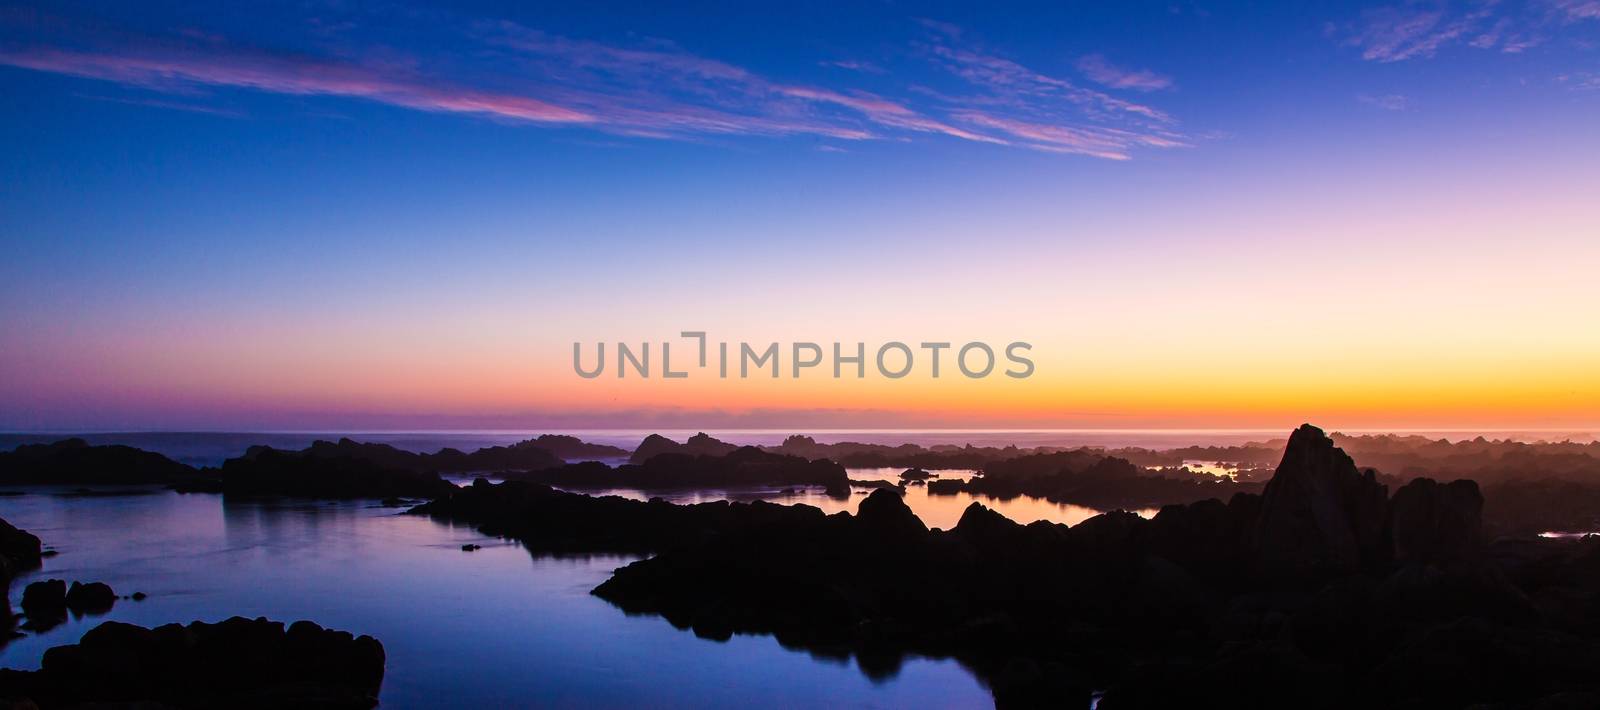 Sunset and Rocks at the Coast by fouroaks